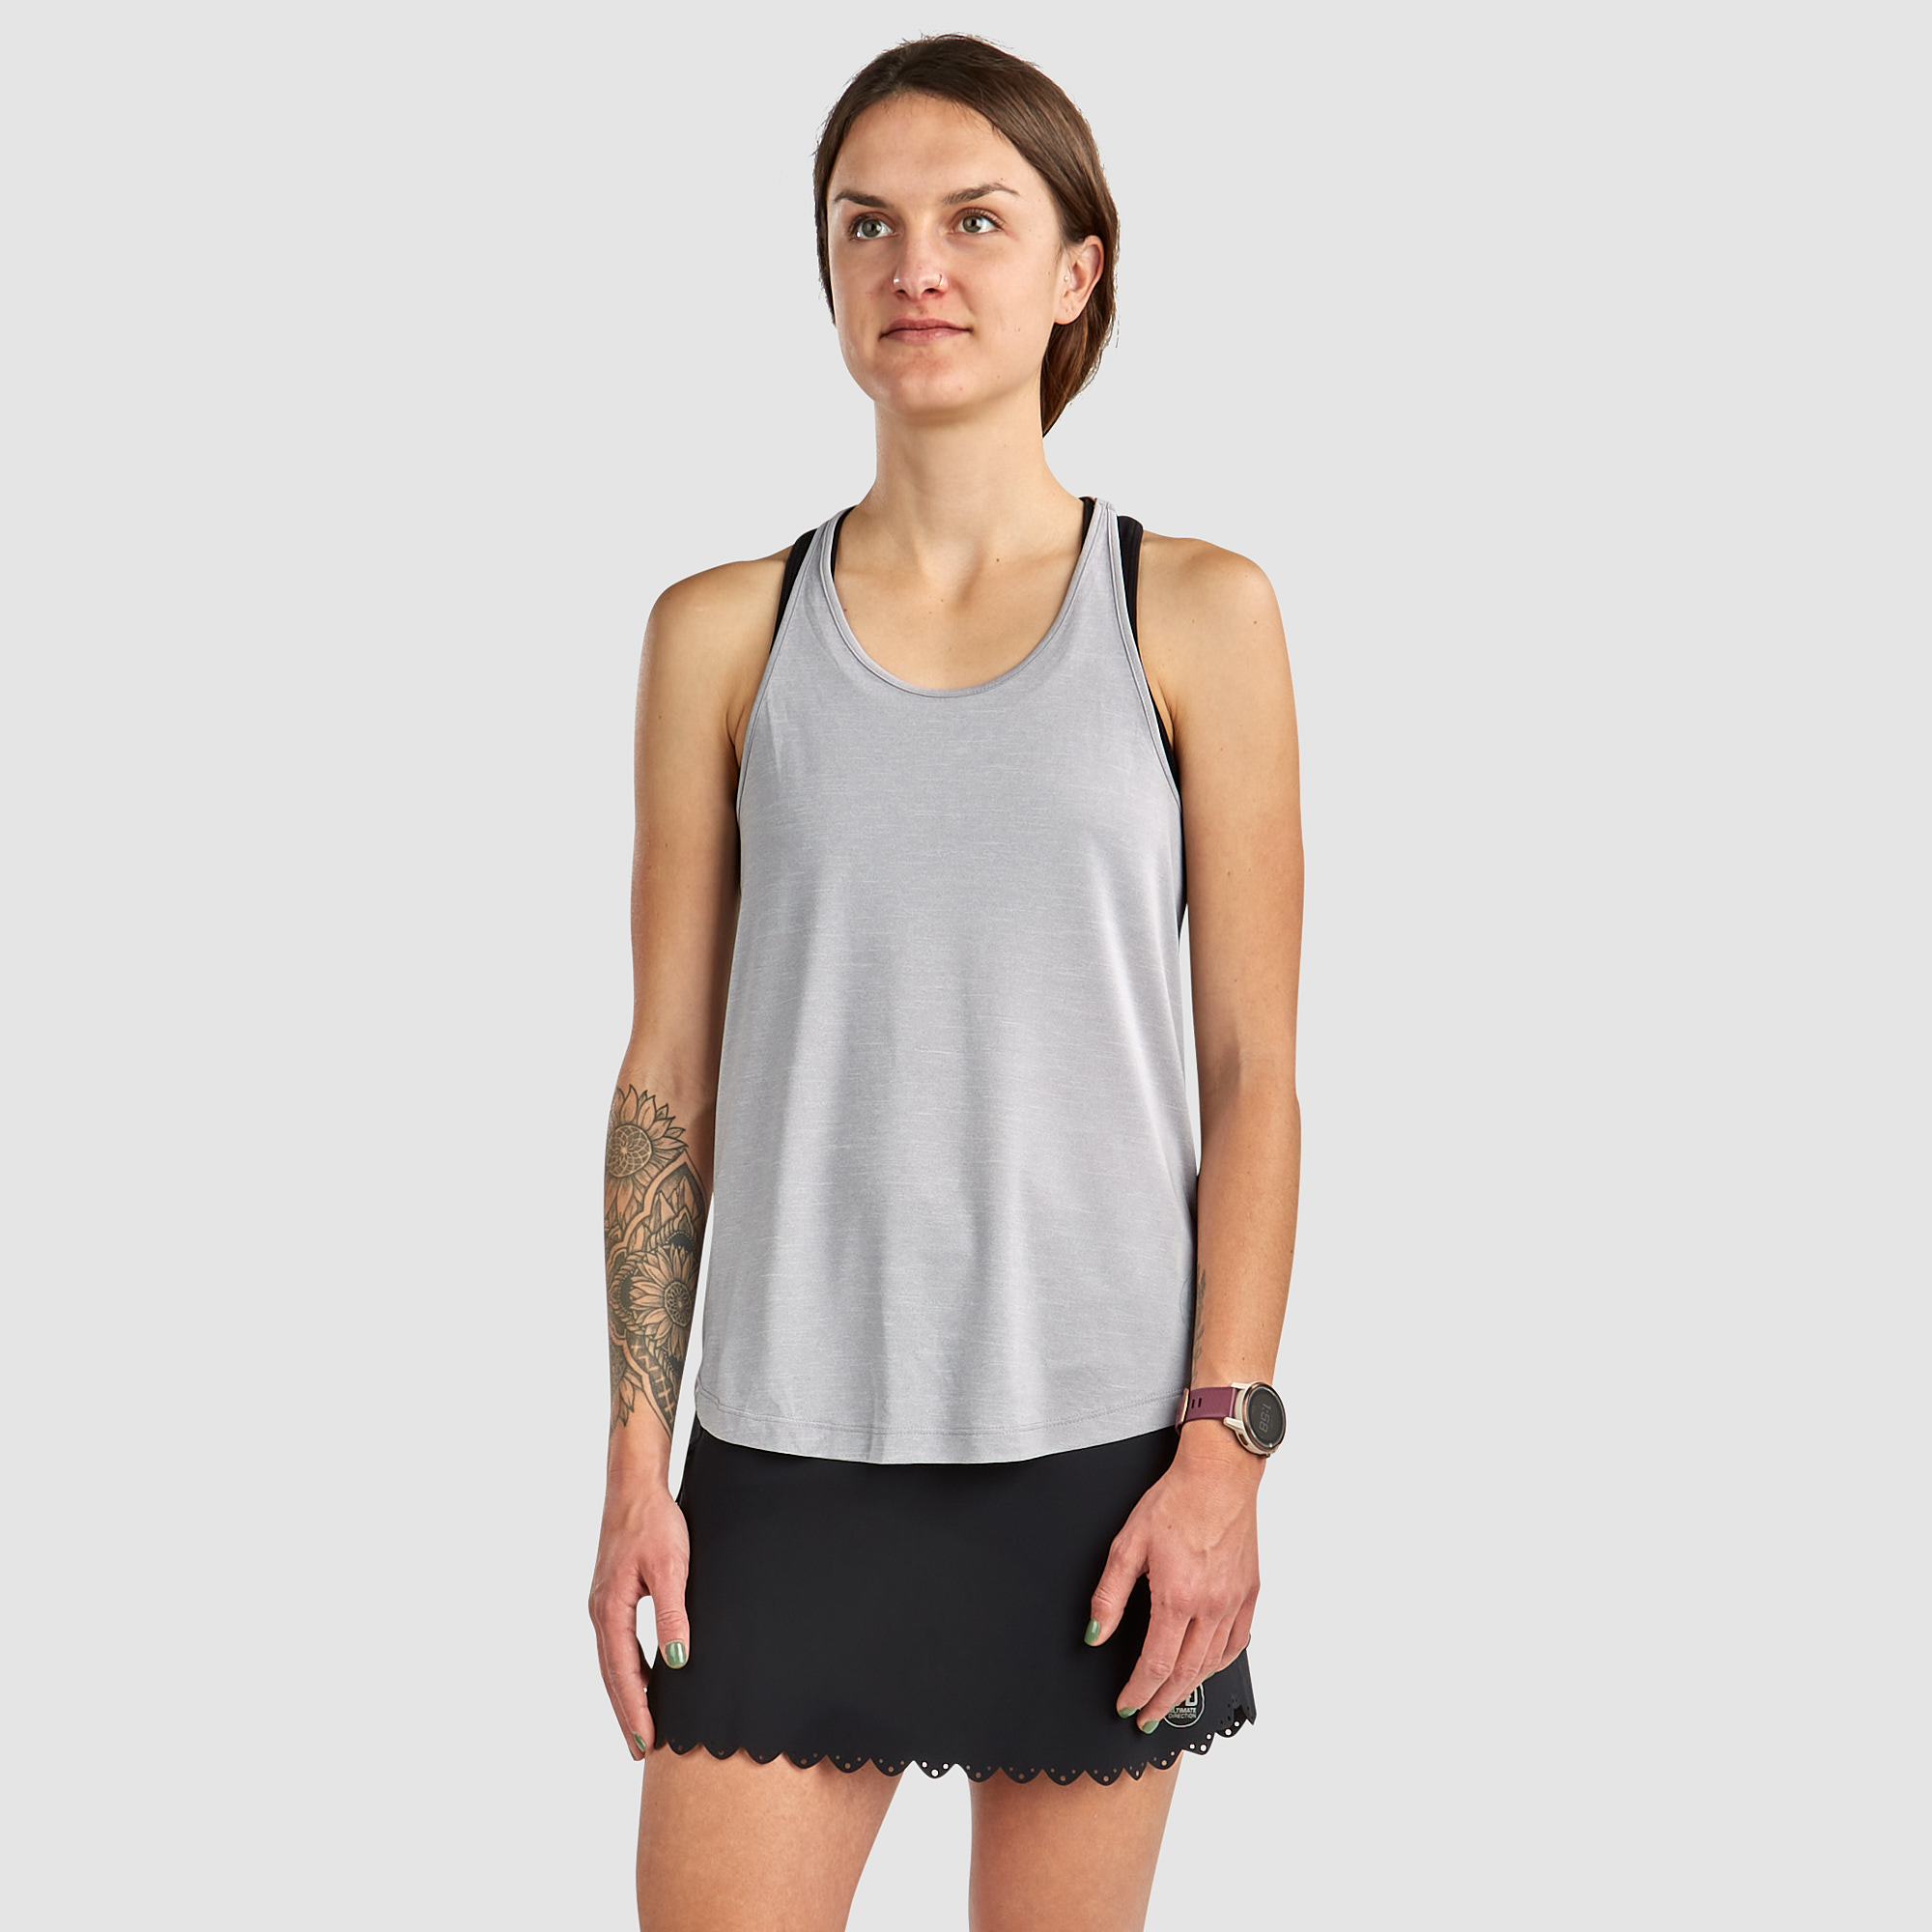 Ultimate Direction Women's Contralis Tank Top in Heather Gray Size XS